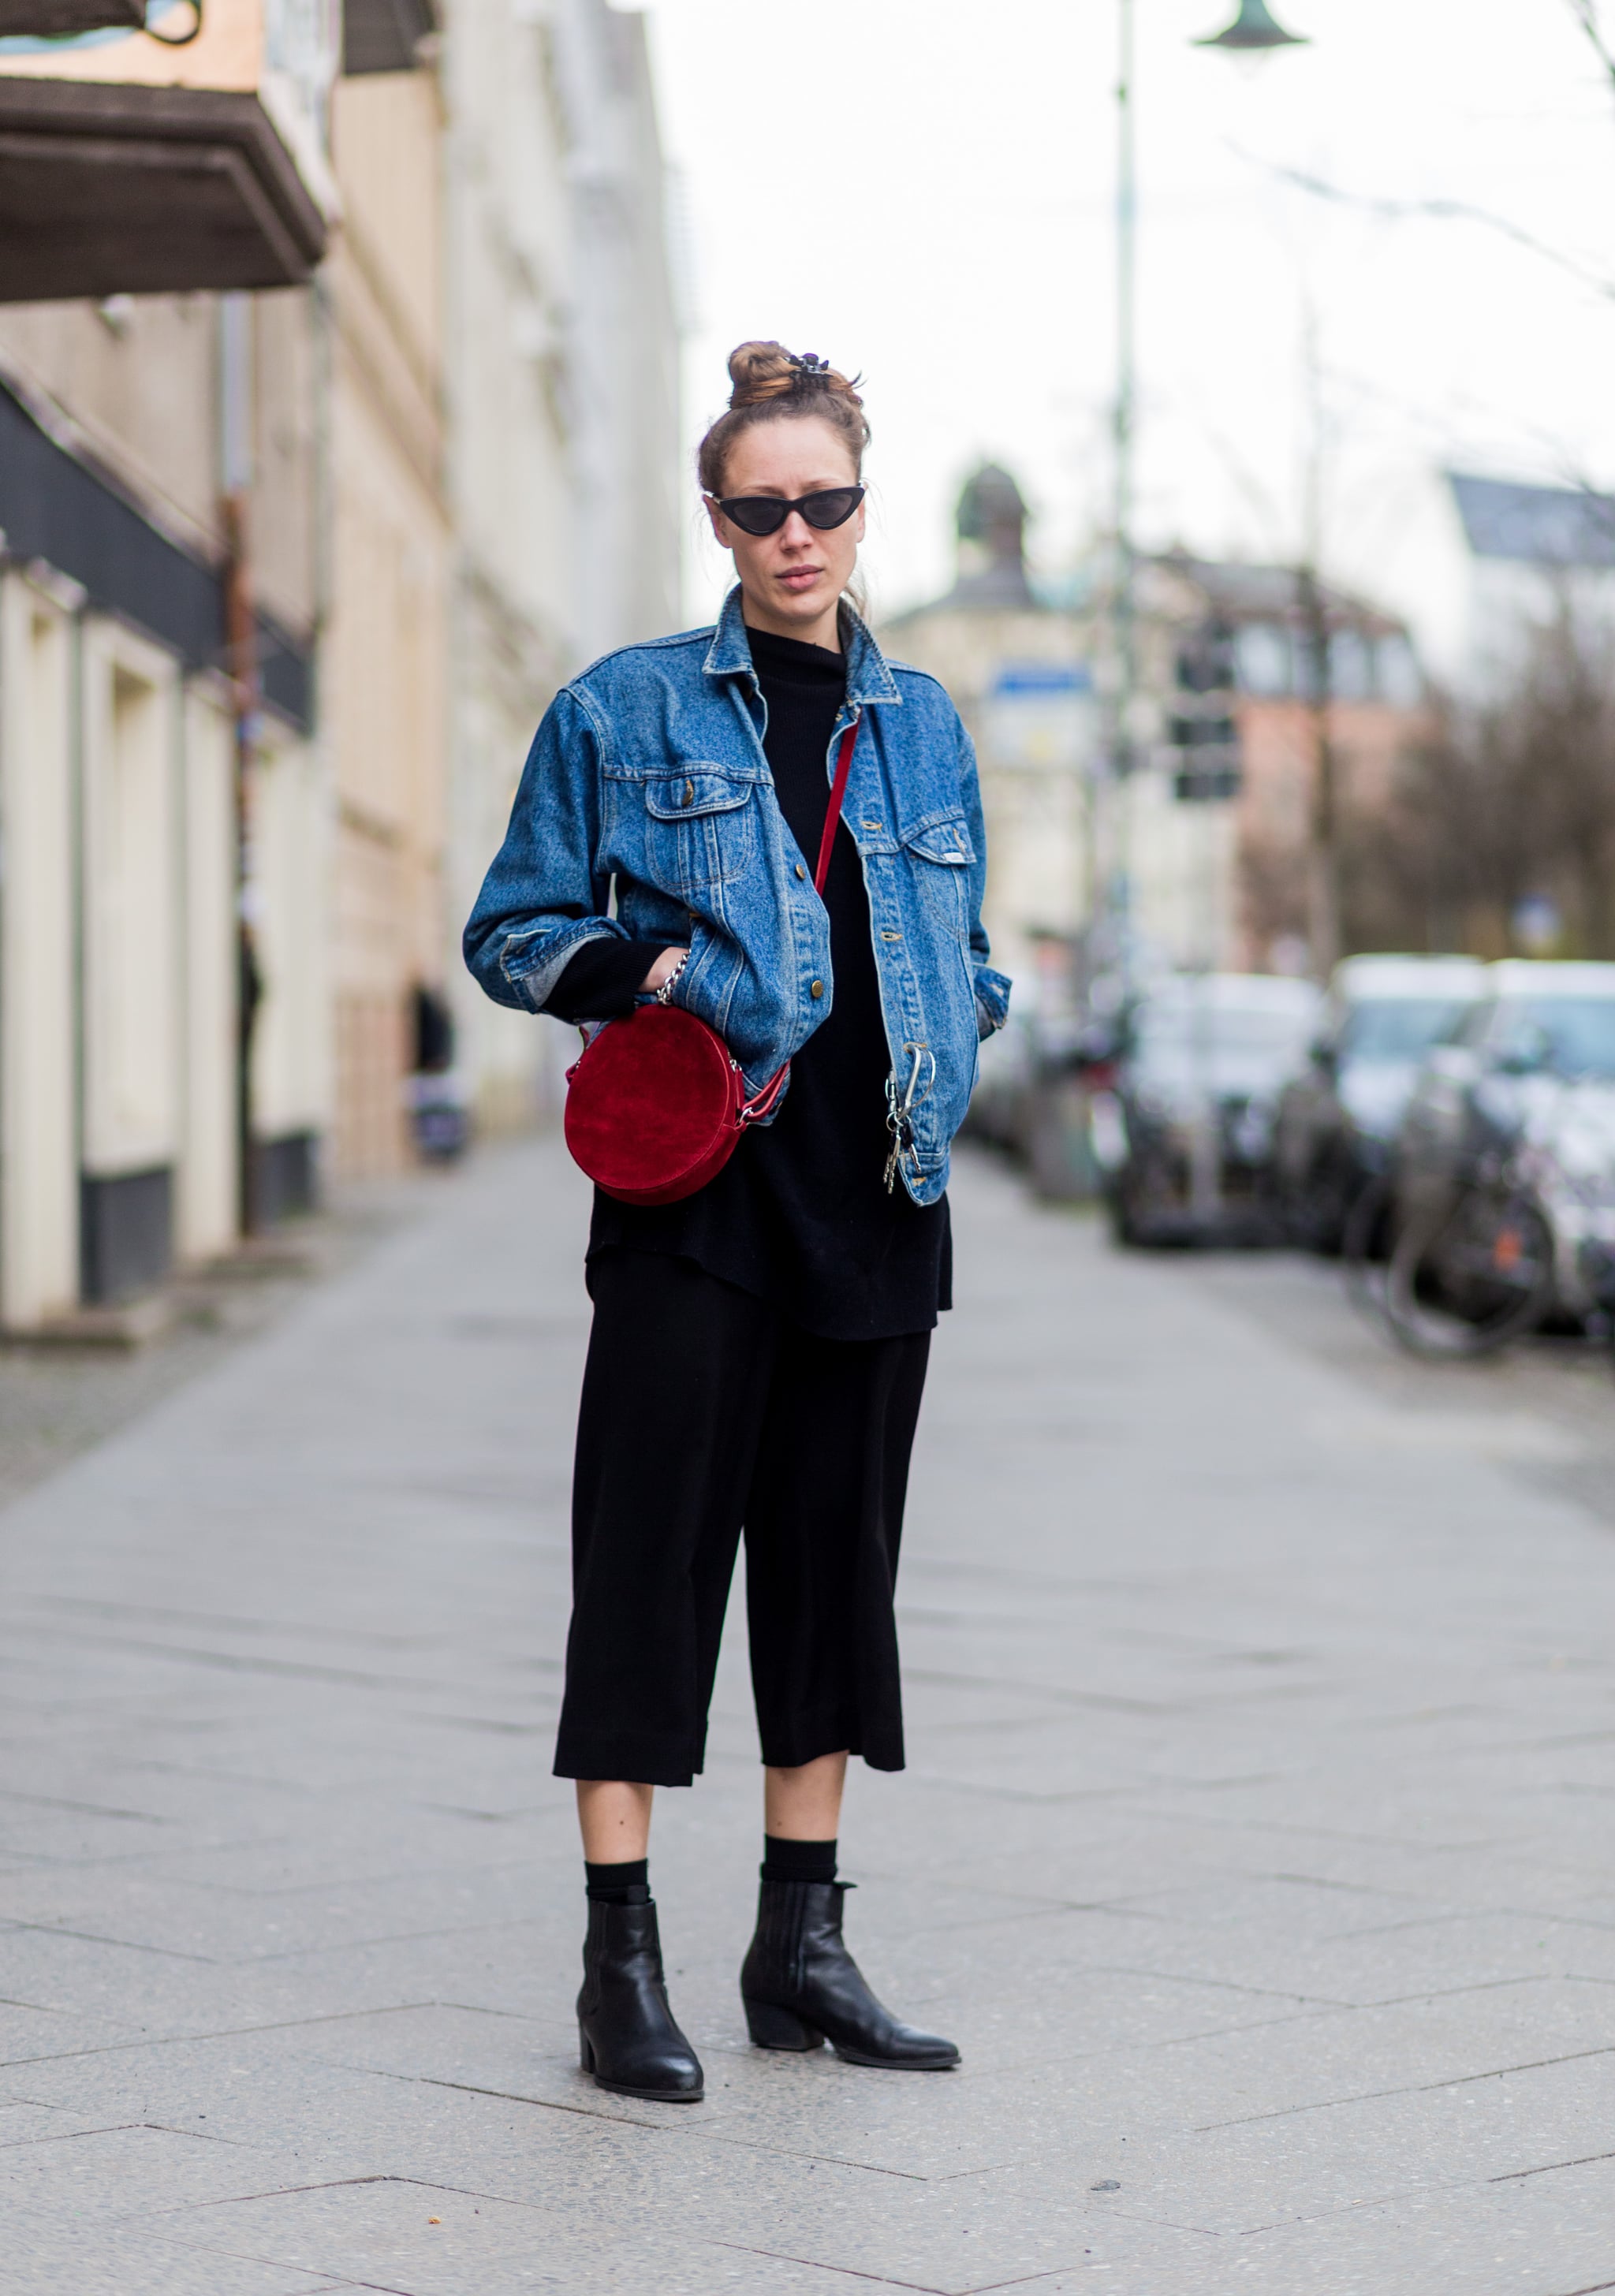 An All-Black Outfit Worn With a Denim Jacket and a Red Bag | 34 Outfit Ideas  That You'll Love Wearing This Fall | POPSUGAR Fashion Photo 11